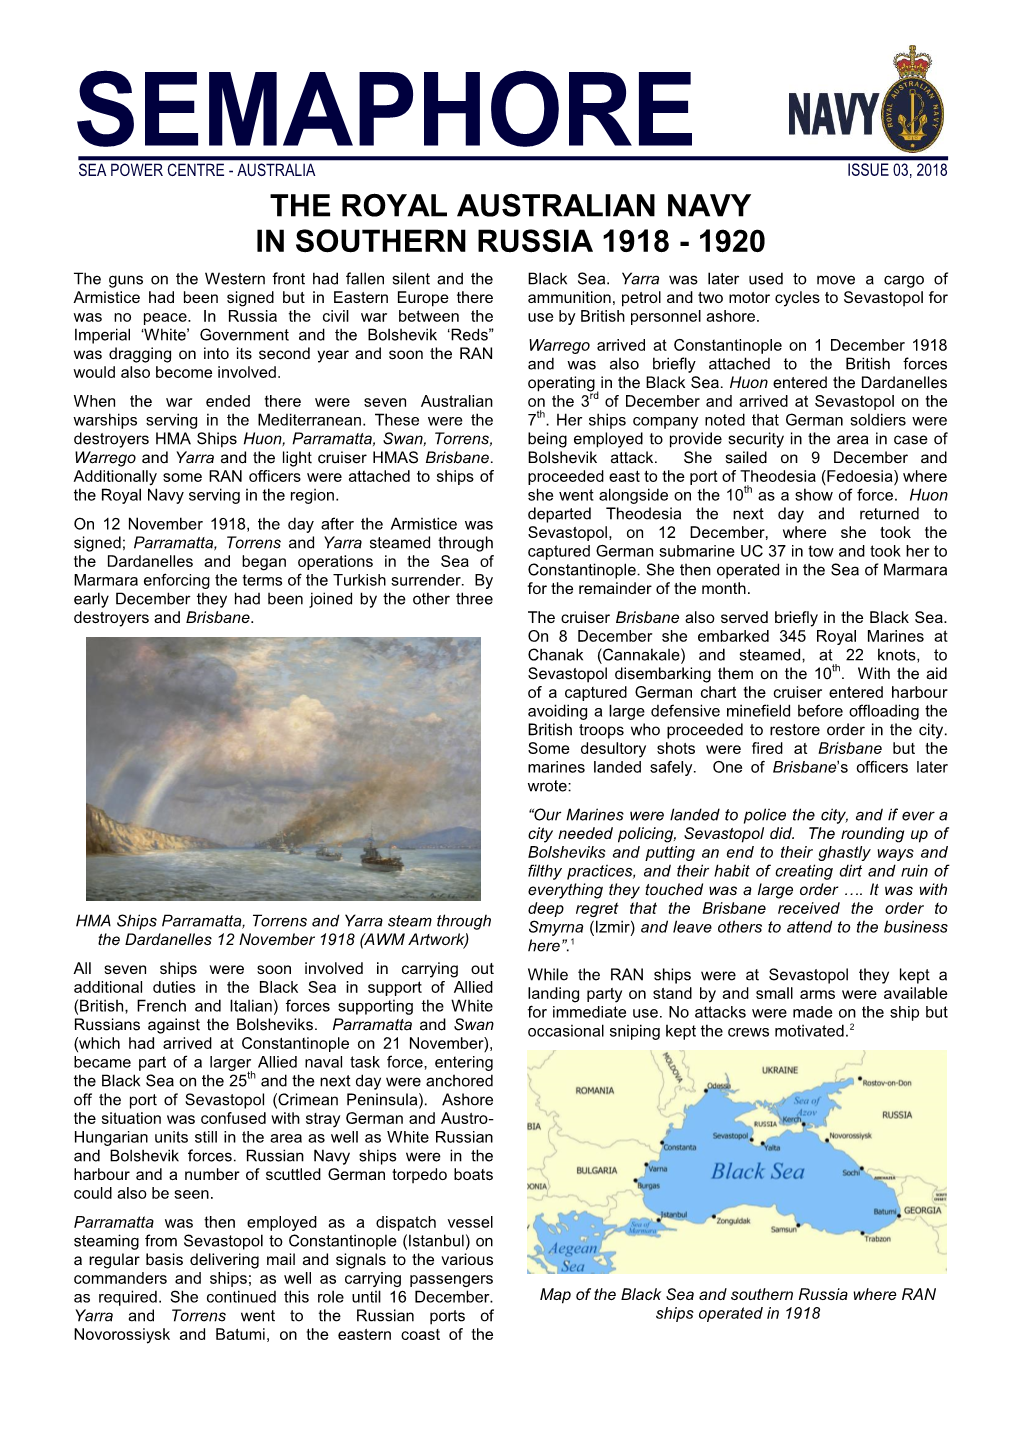 RAN in Southern Russian in 1918-20 Issue 3 April 2018